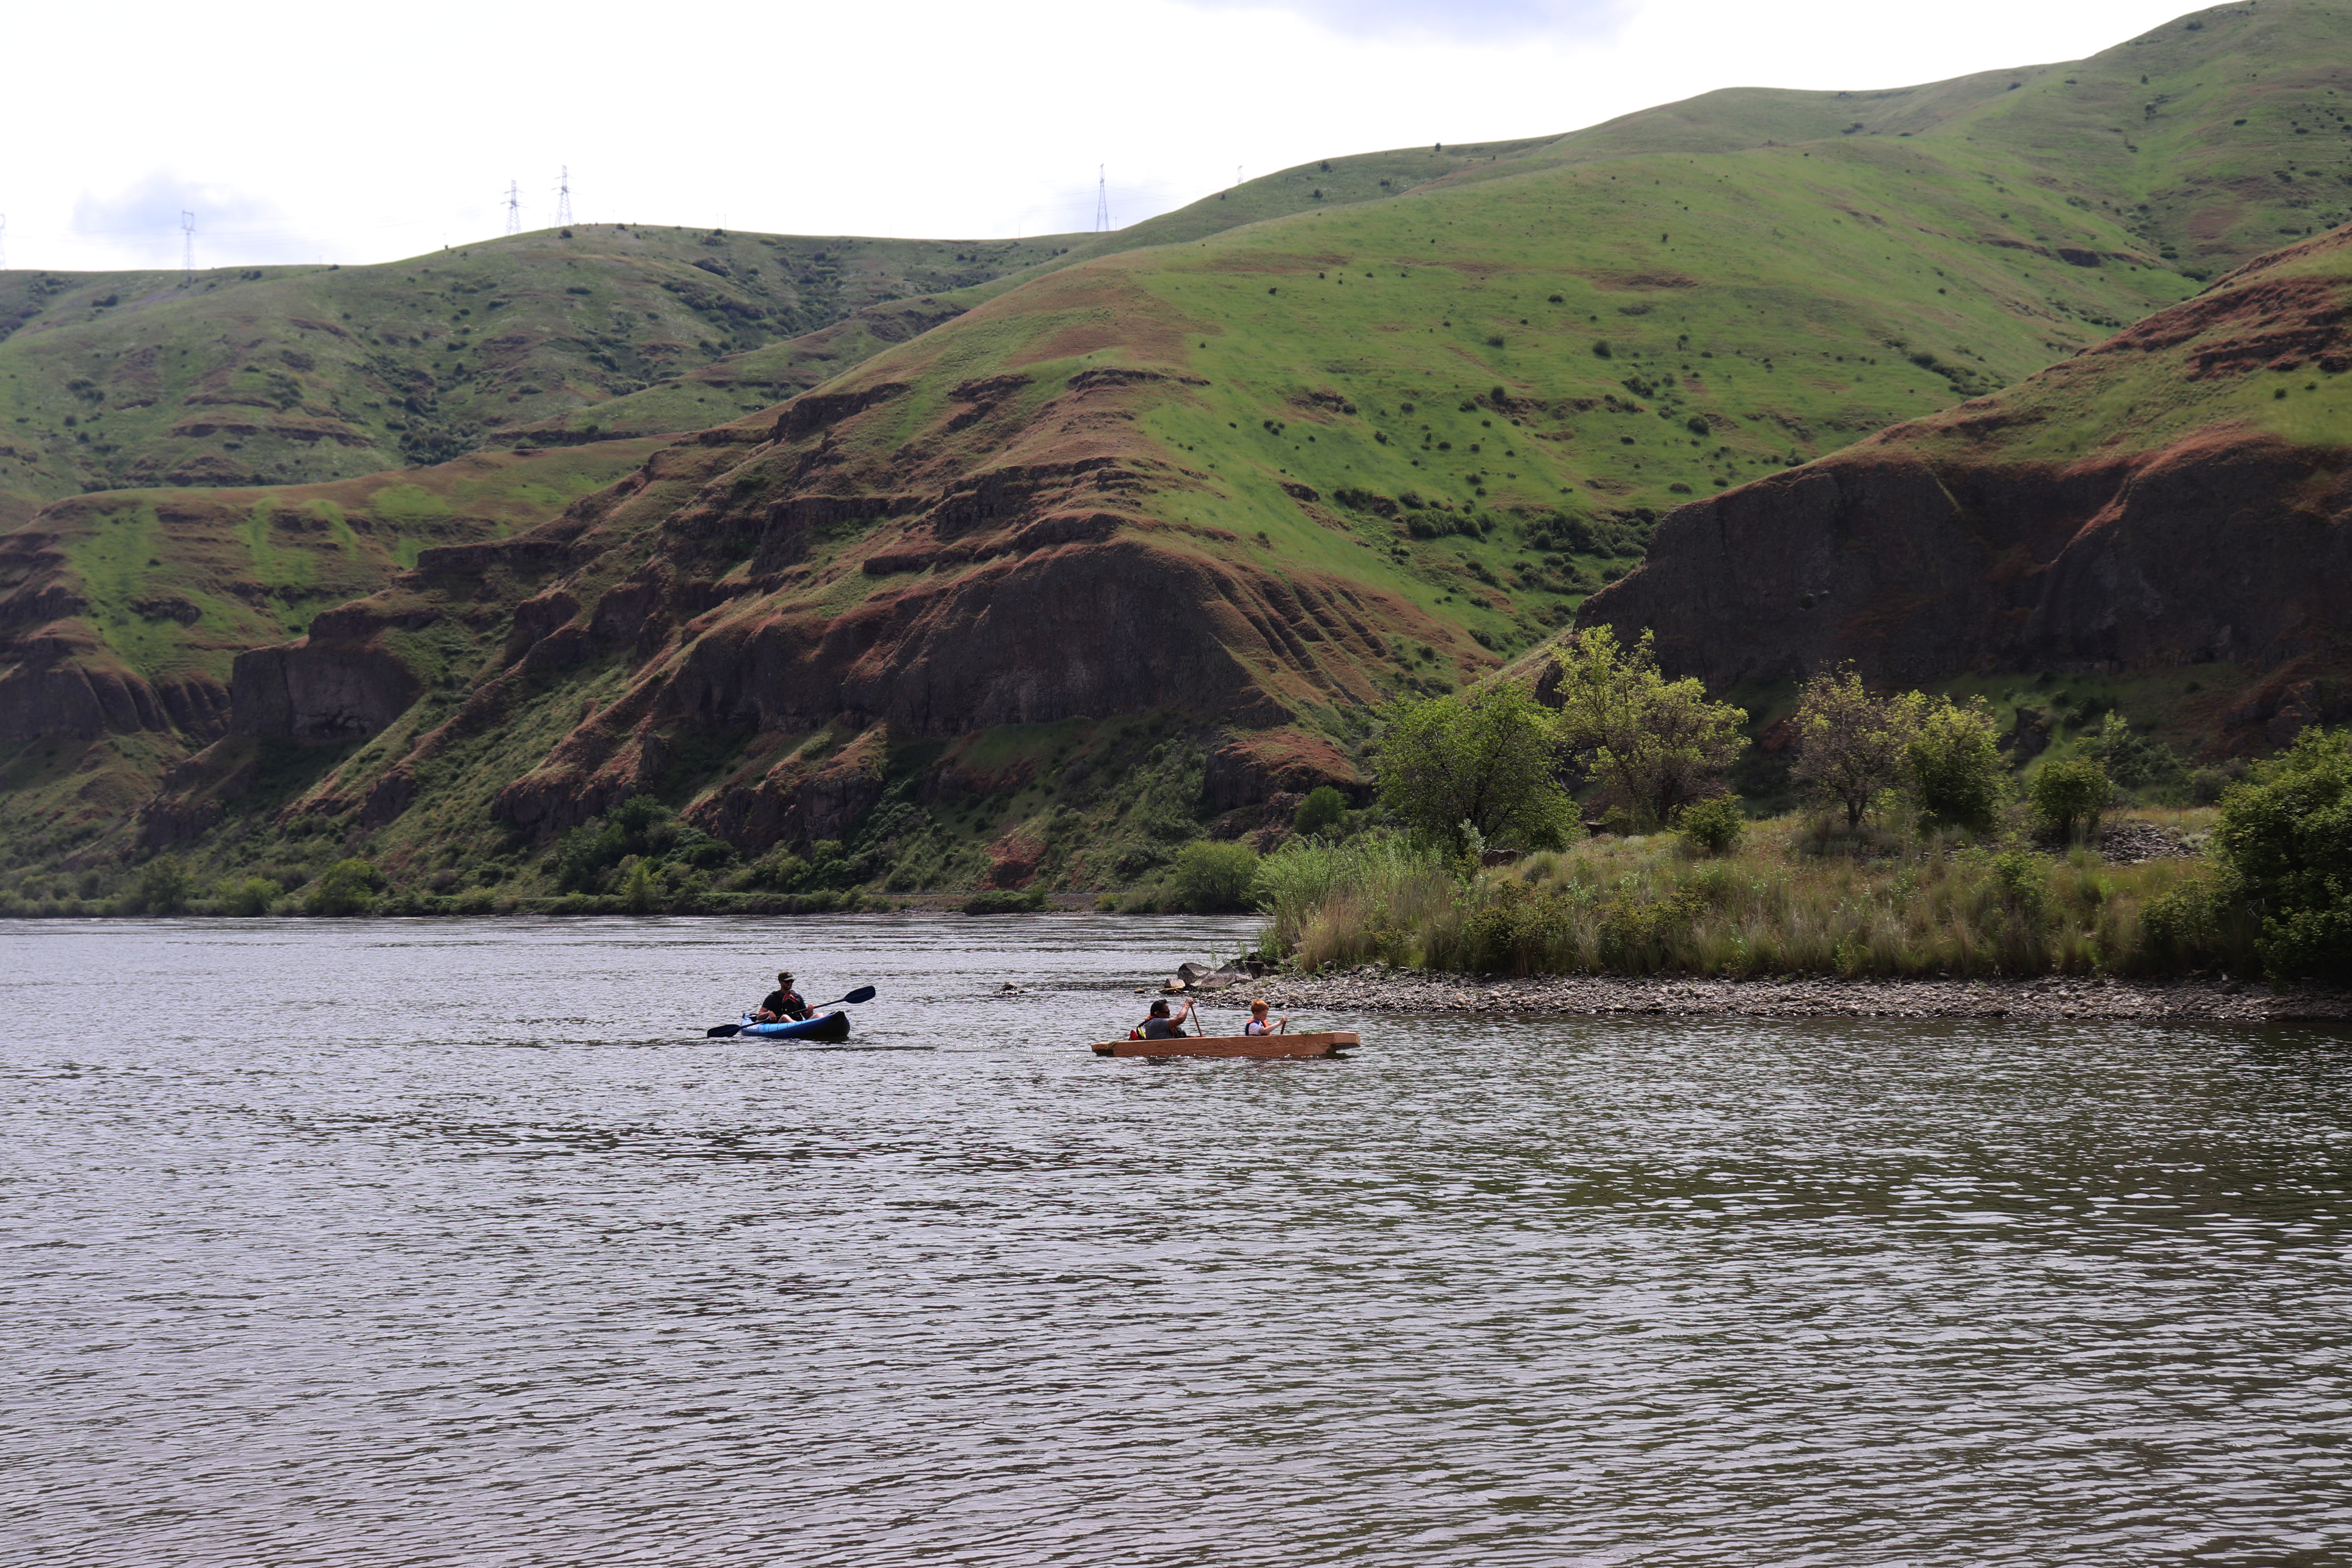 Fourth-grader Russe;; Scott and Gary Dorr row across the water in a dugout canoe